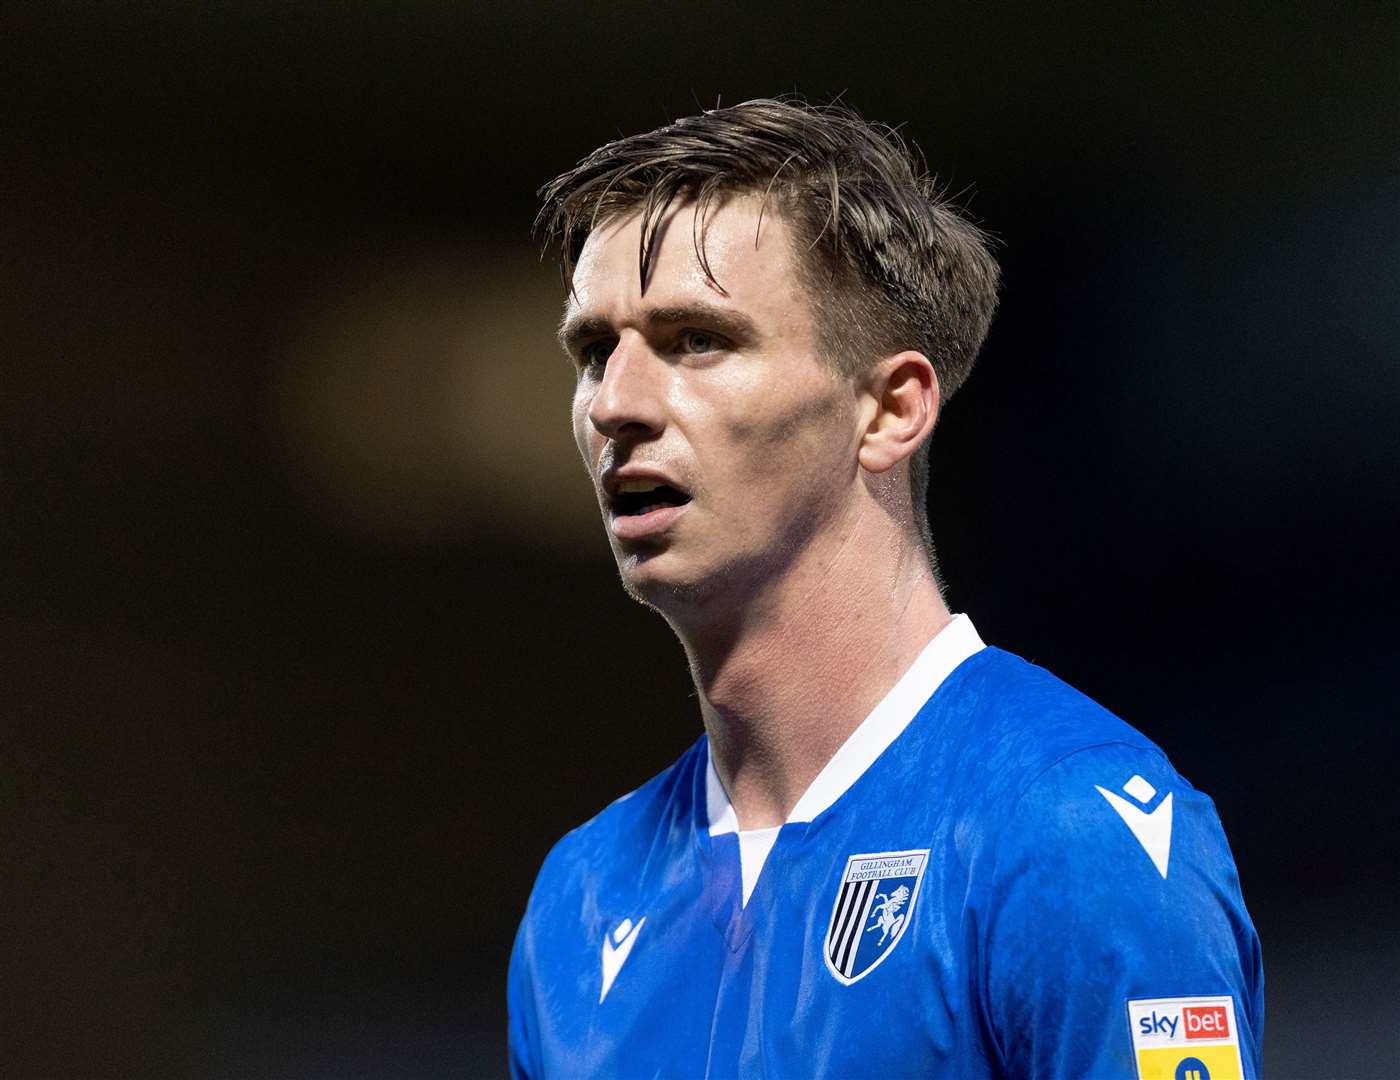 Oli Hawkins hasn't featured for the Gills yet this season